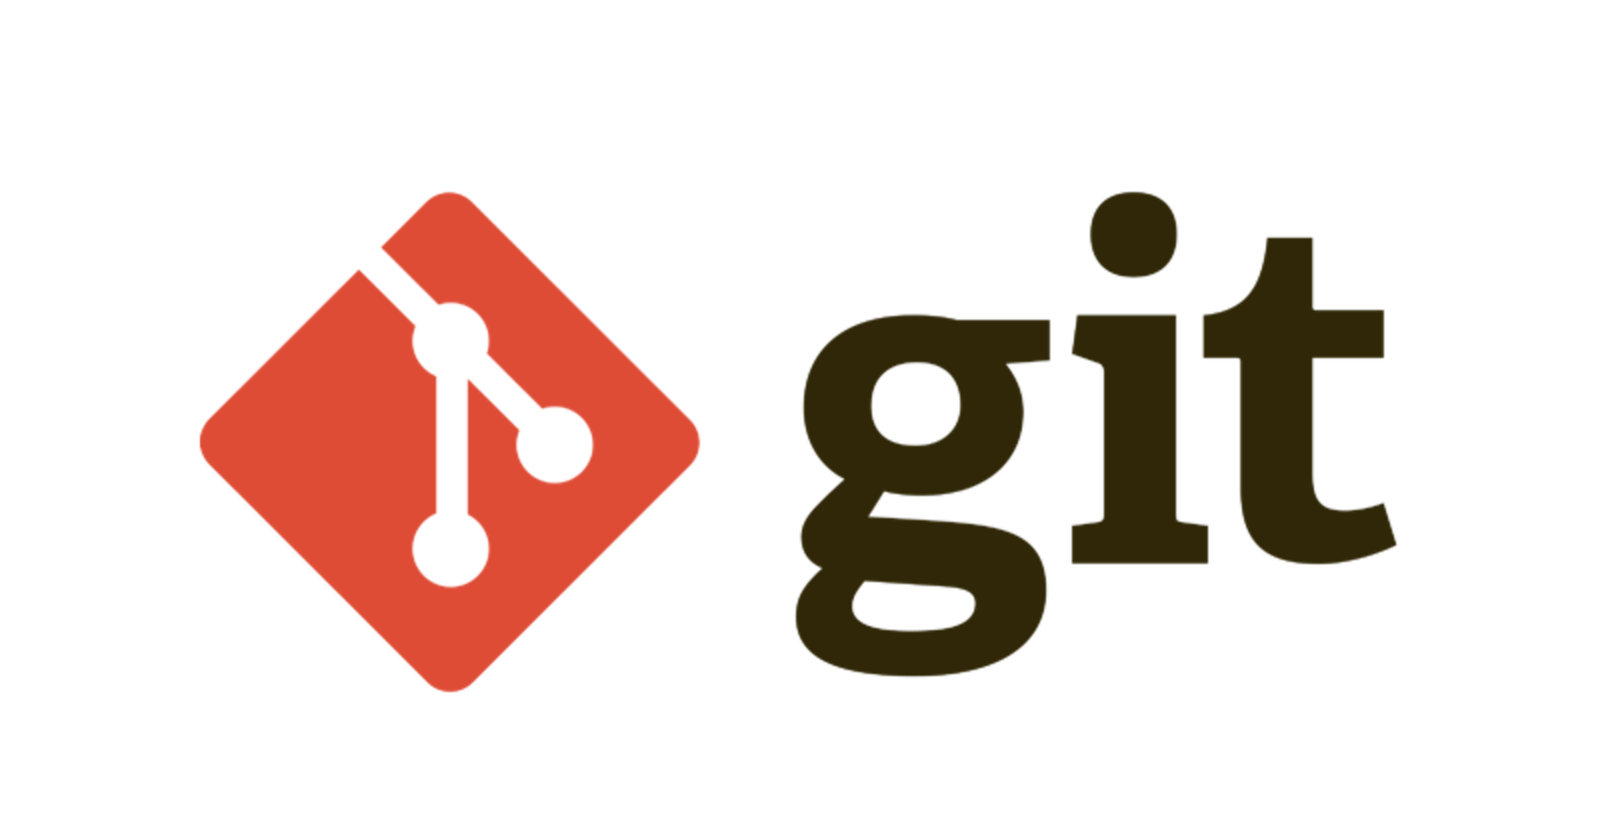 Git and GitHub: 
How to work with Git Files? 
What are the basic Git Commands to know? 
Working tree, Index, and Commit history explained